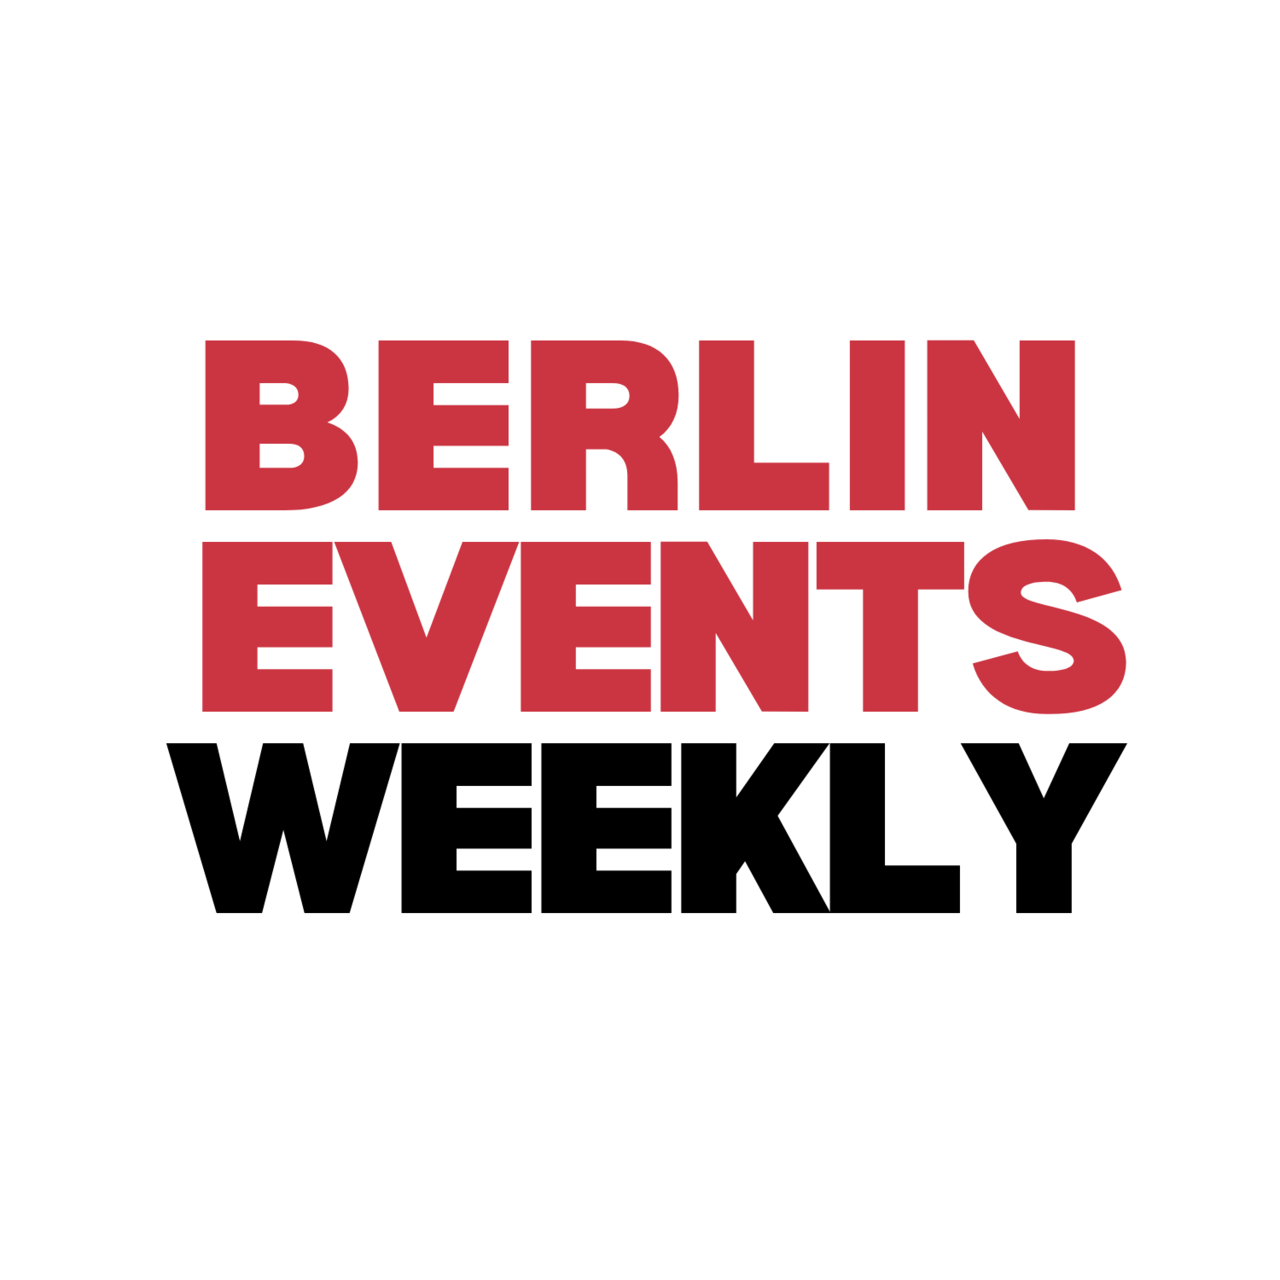 Artwork for Berlin Events Weekly